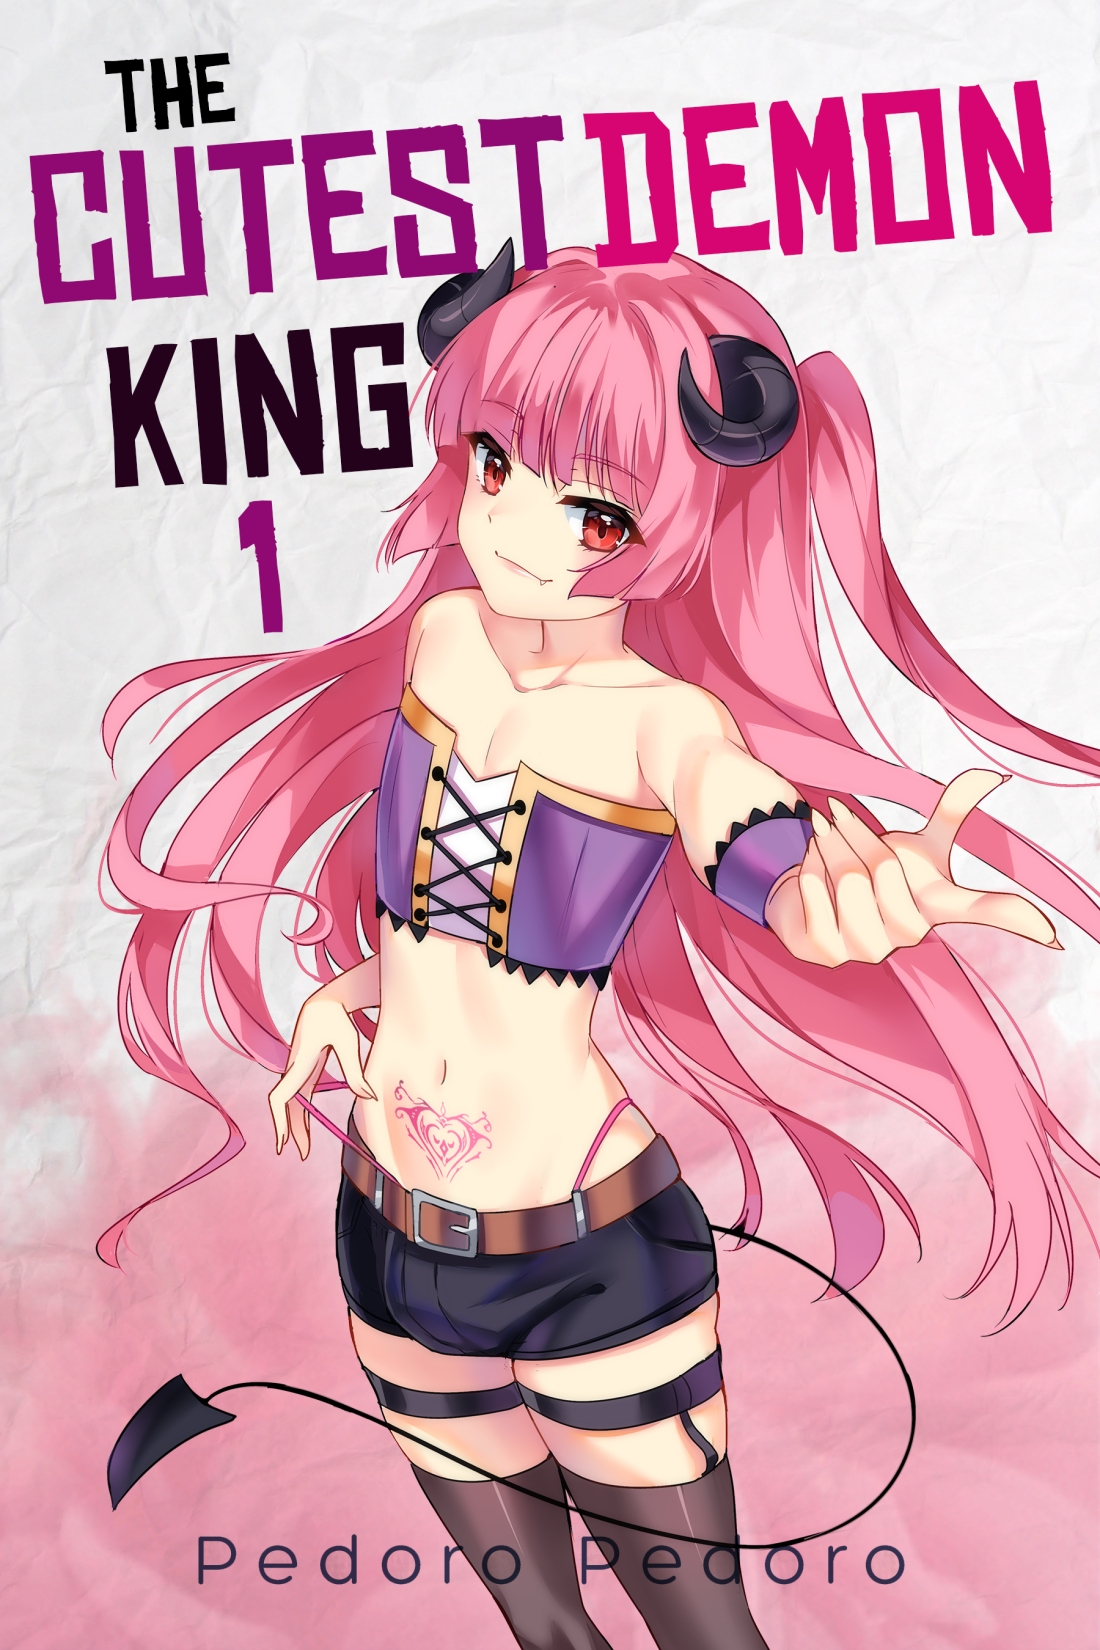 The Cutest Demon King 01 - Cover 1